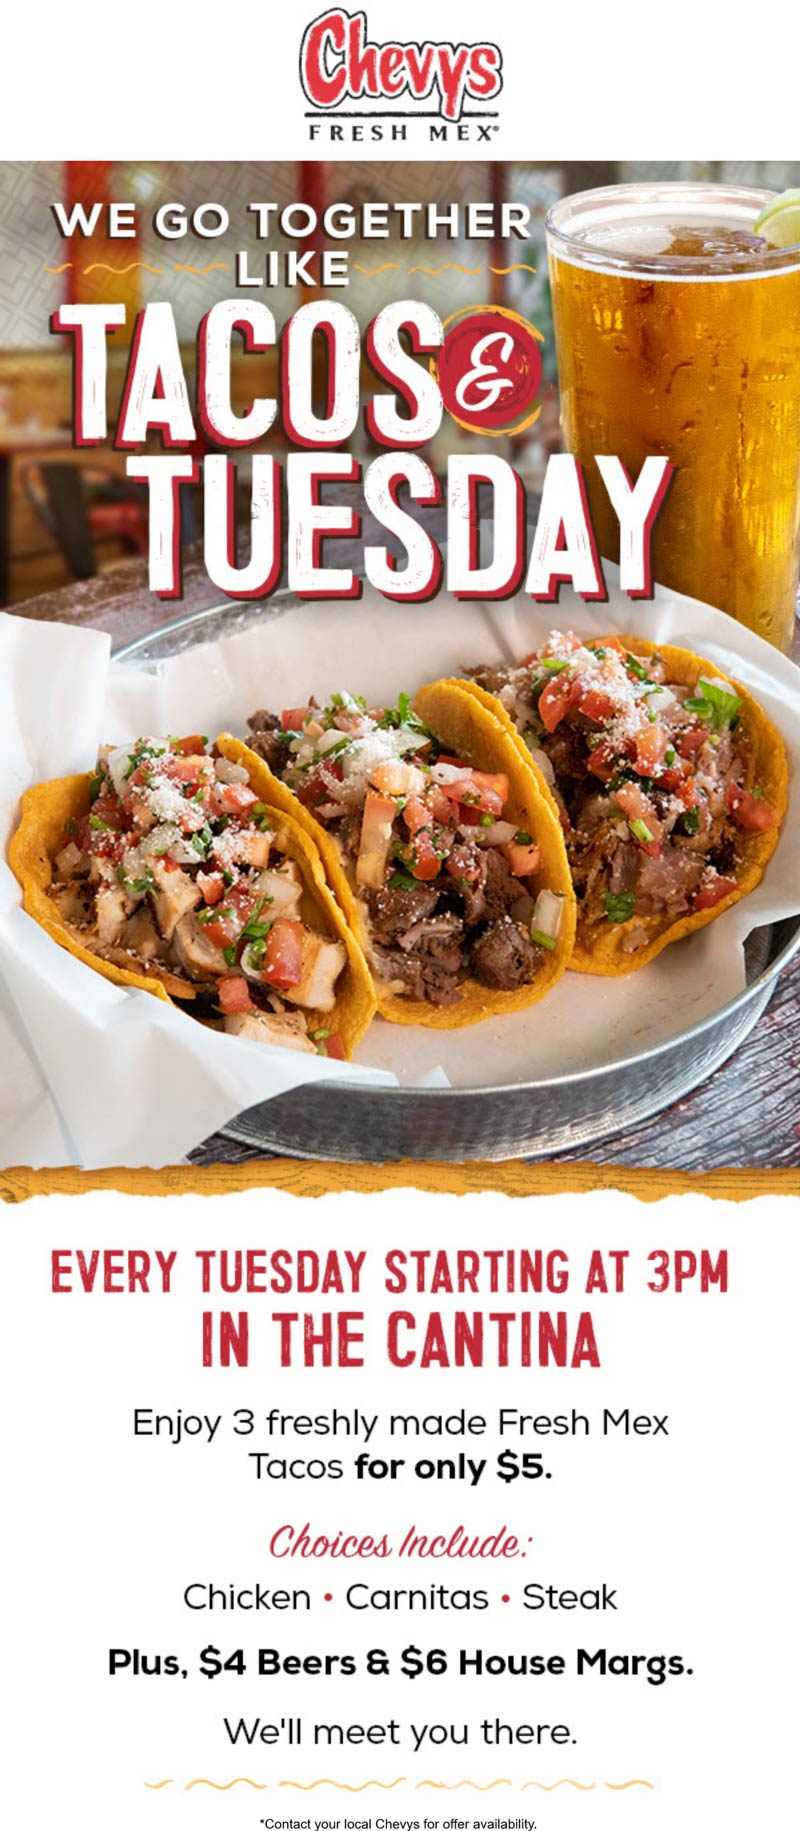 Chevys restaurants Coupon  3 tacos for $5 today at Chevys Fresh Mex restaurants #chevys 